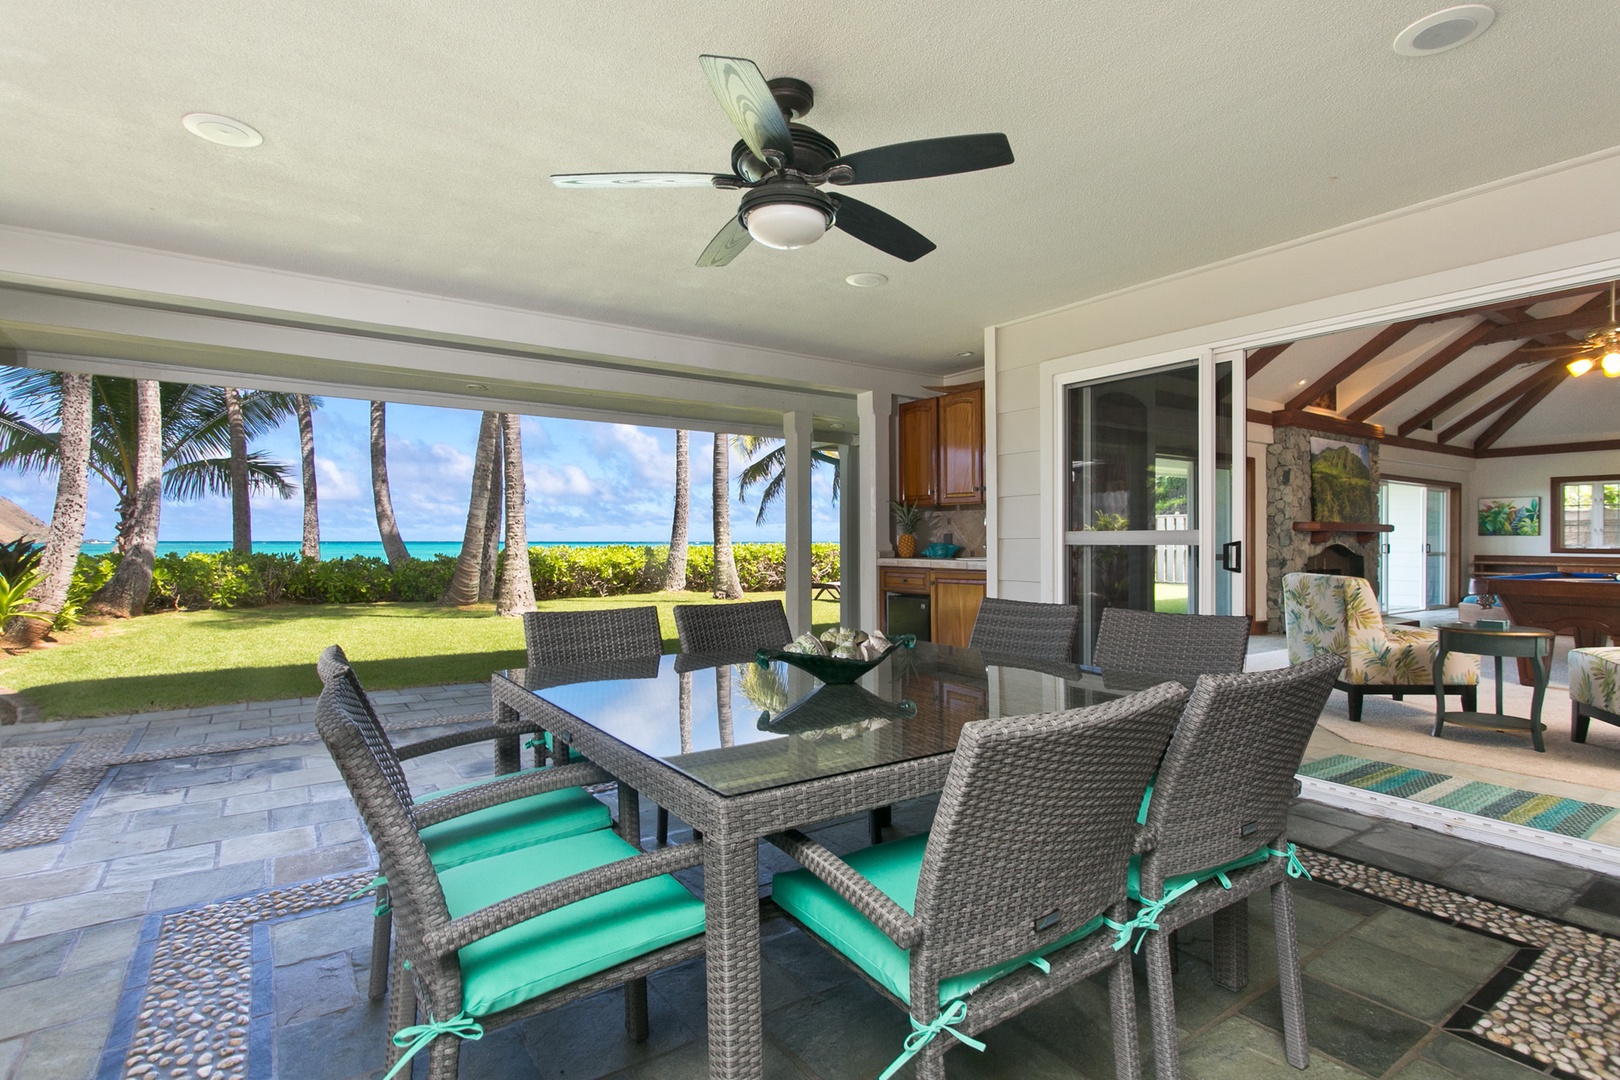 Kailua Vacation Rentals, Hale Melia* - Alfresco dining with a view, where every meal is accompanied by a gentle breeze and ocean views.